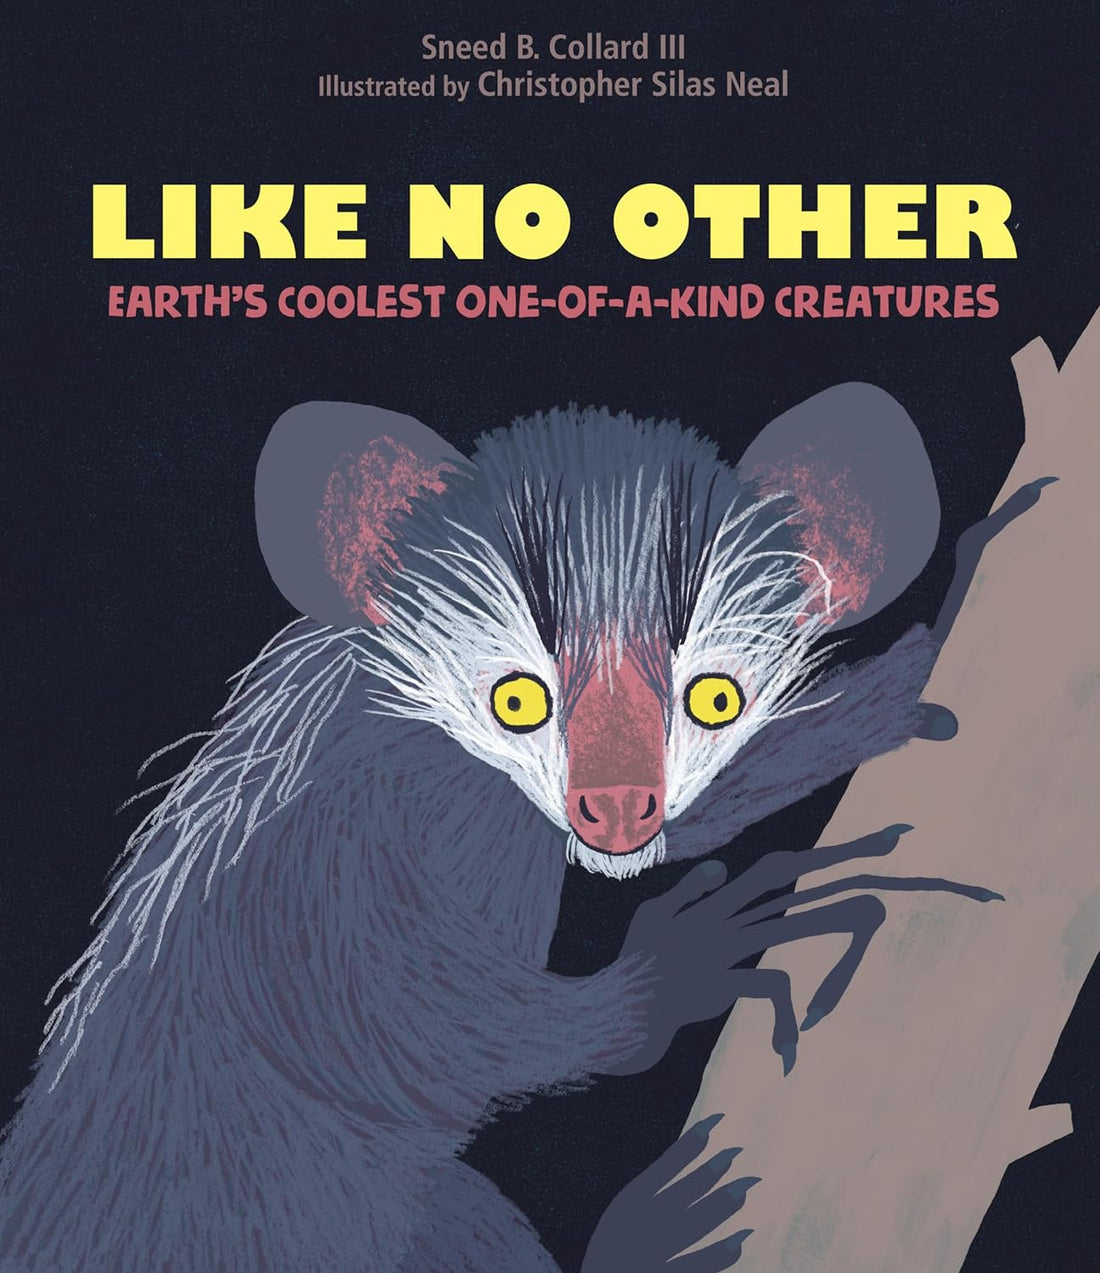 Like No Other: Earth’s Coolest One-of-a-Kind Creatures